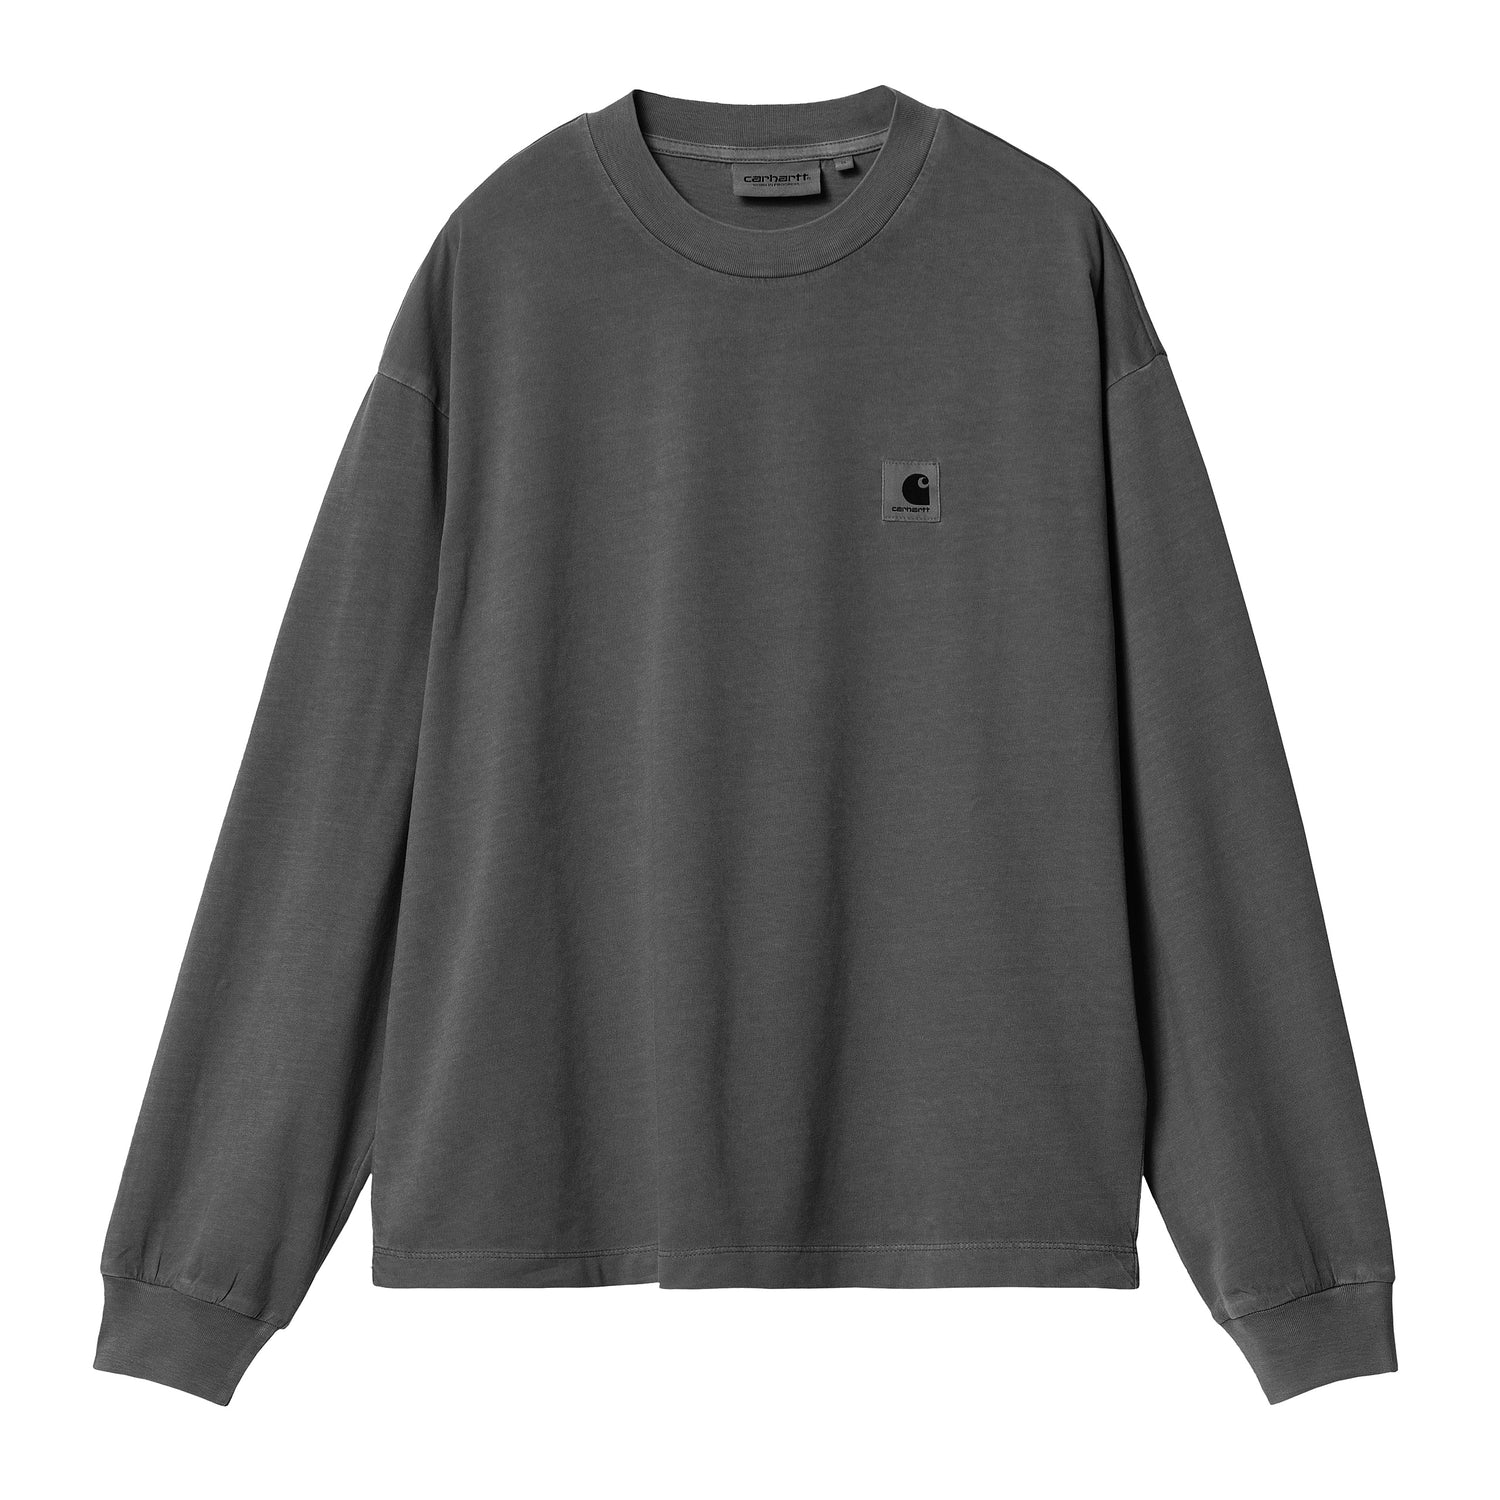 W' L/S NELSON T-SHIRT CHARCOAL GARMENT DYED